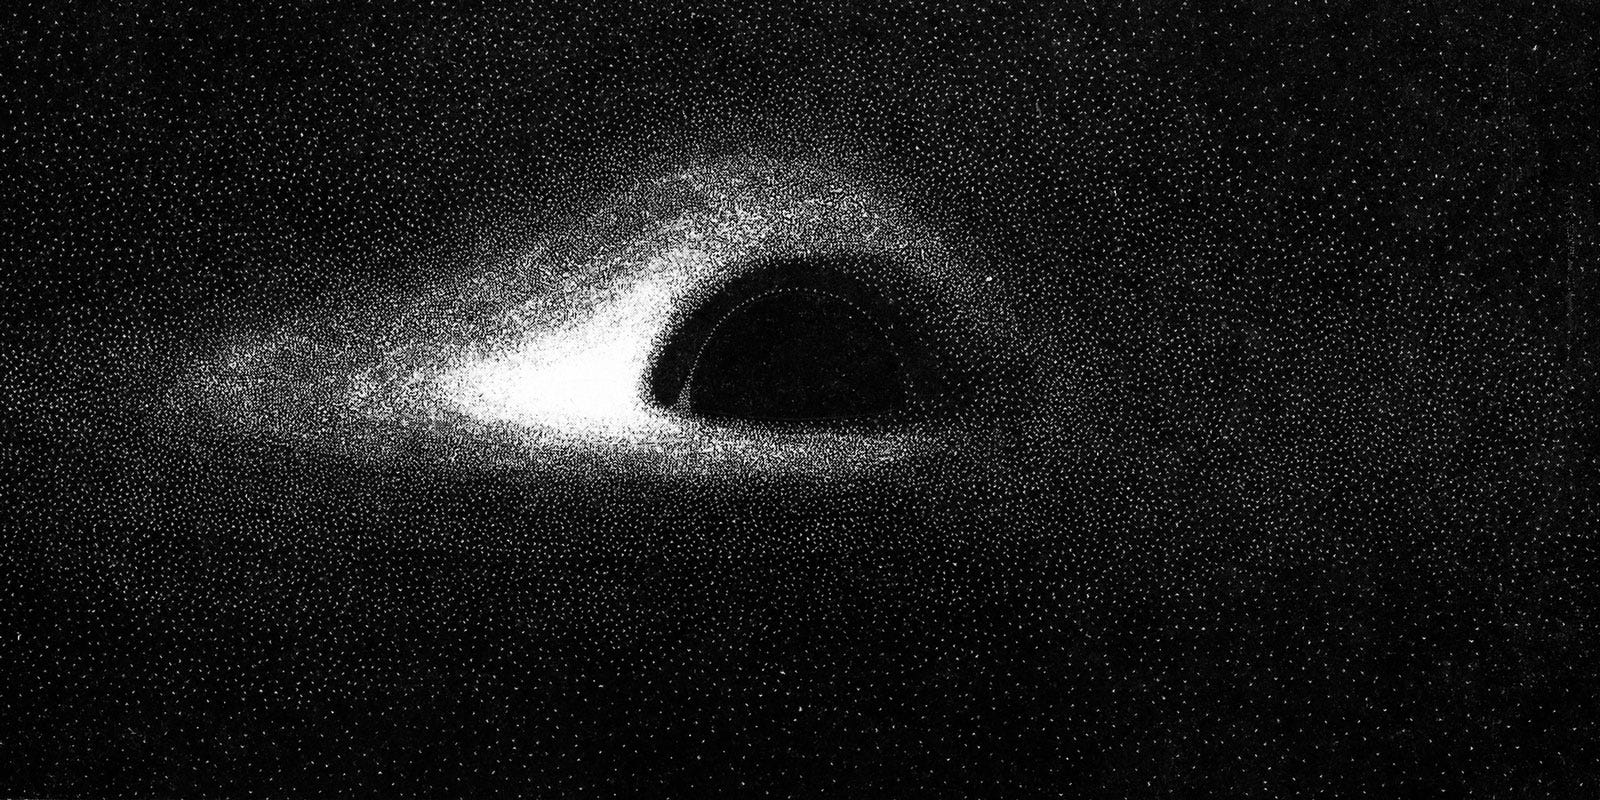 Capturing Our First Ever Image of a Black Hole – FutureSin – Medium